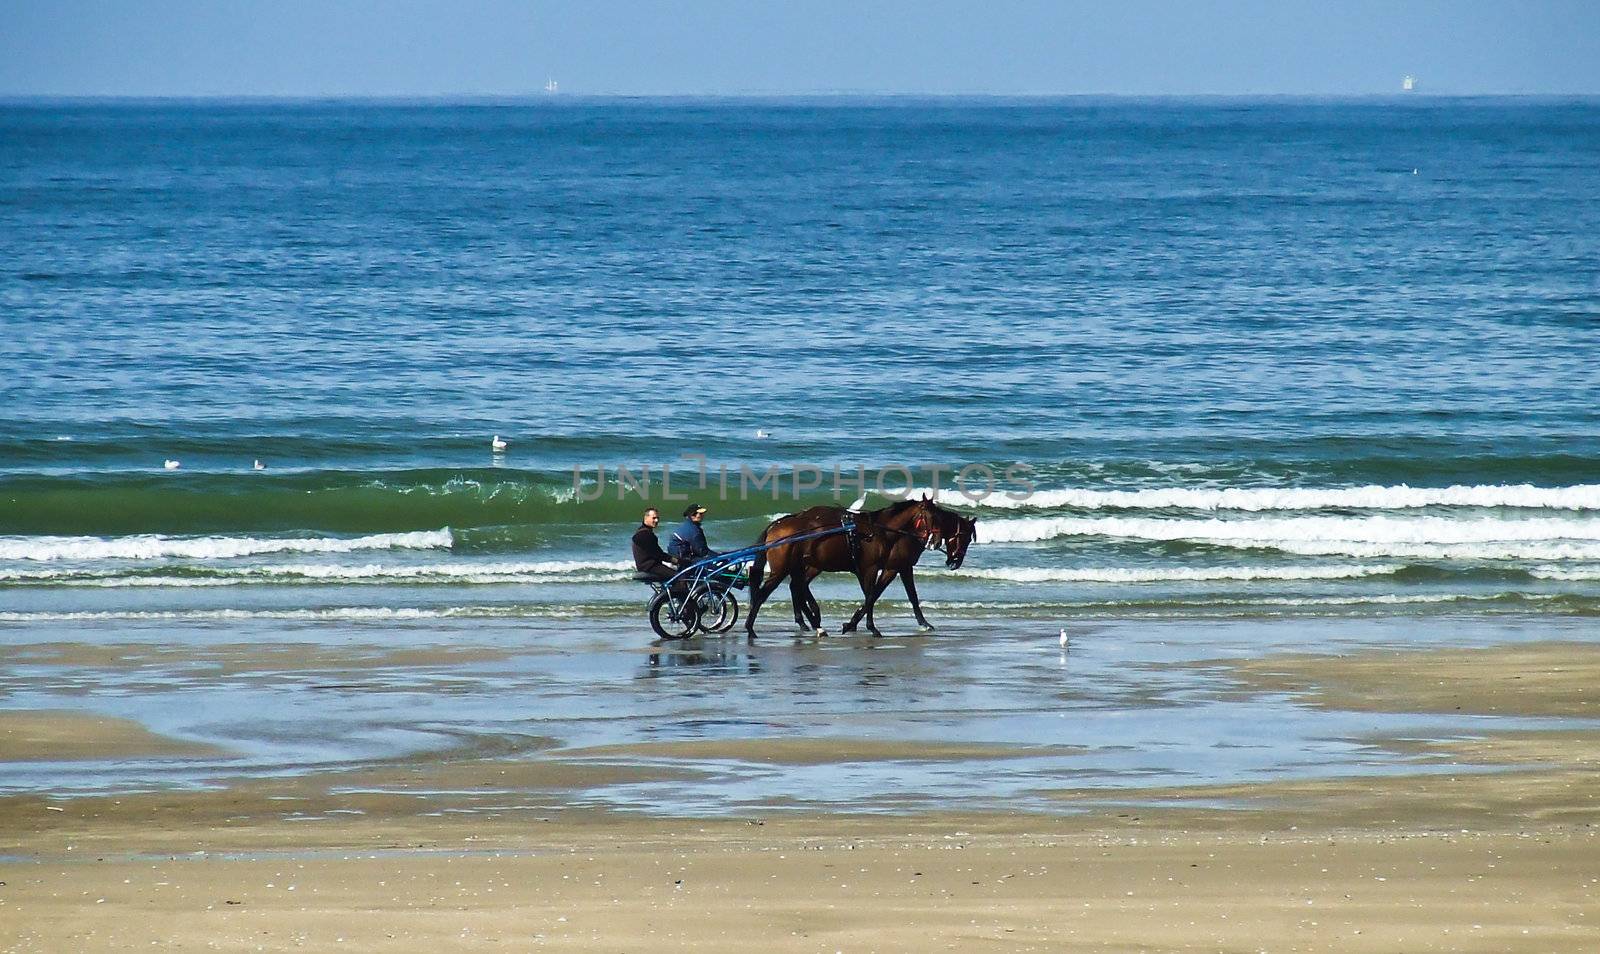 Horses pulling a carriage on Juno beach